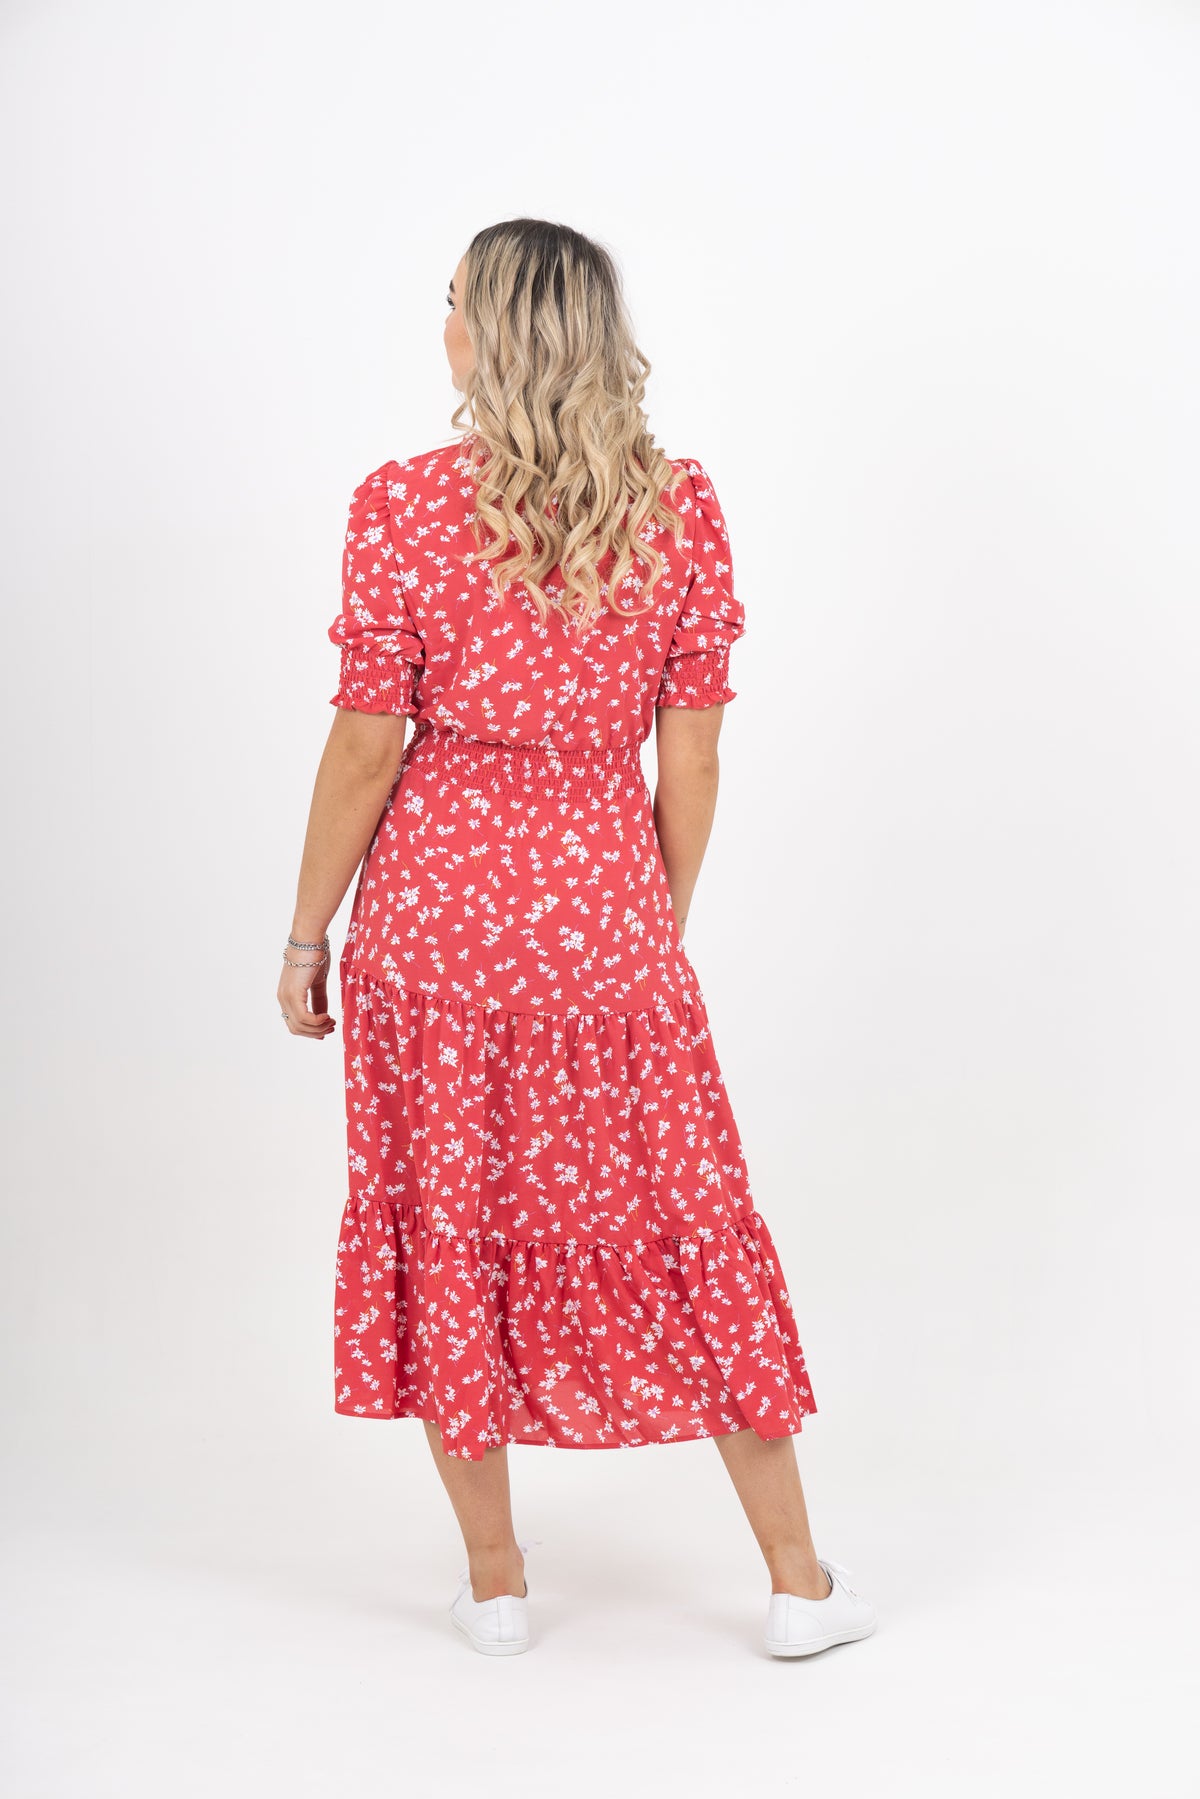 Serene Dress Cheerful - EXCLUSIVE TO MINT